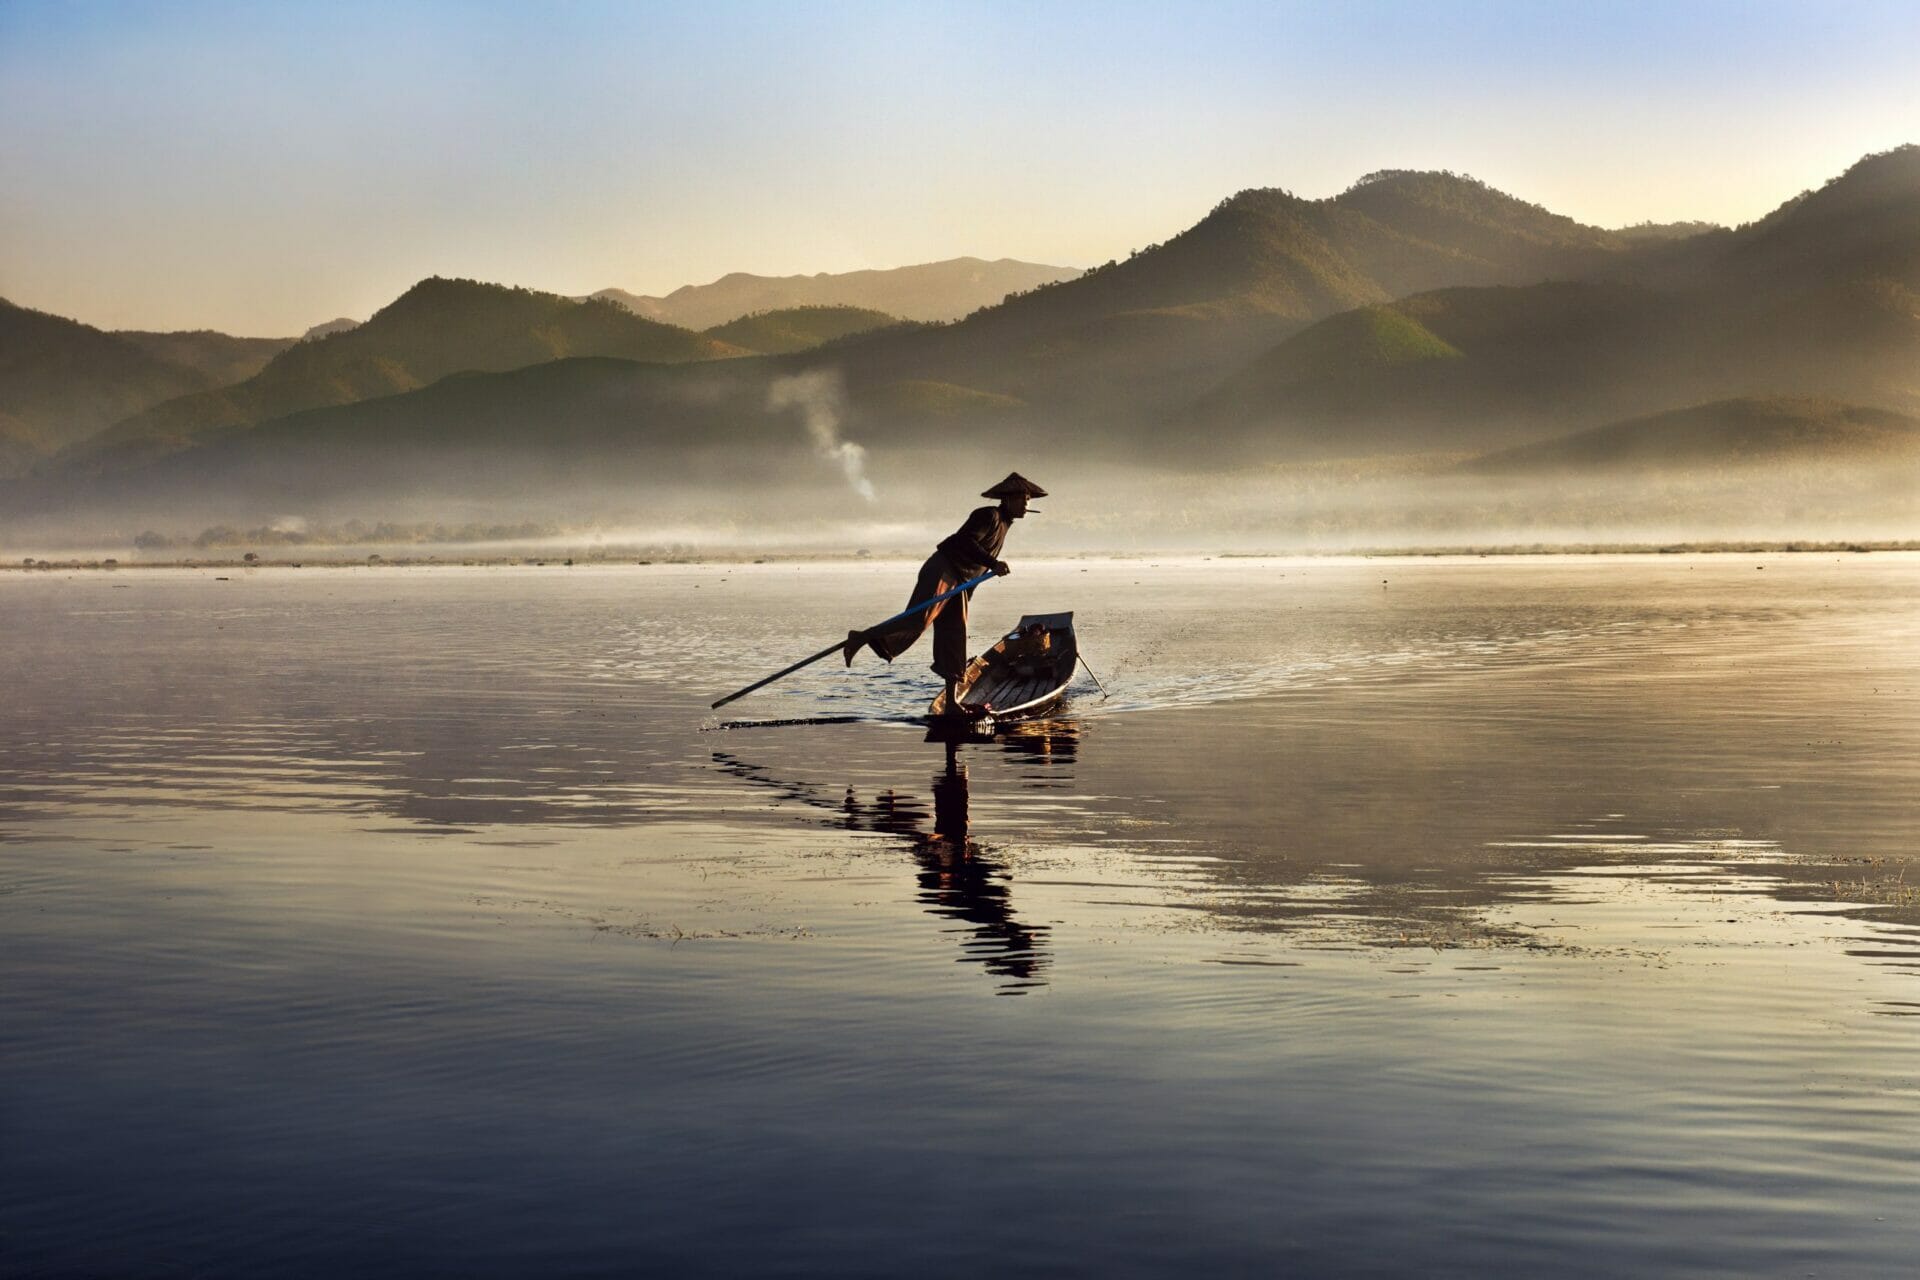 Photo taken by McCurry of a fisherman sailing on a lake in Myanmar